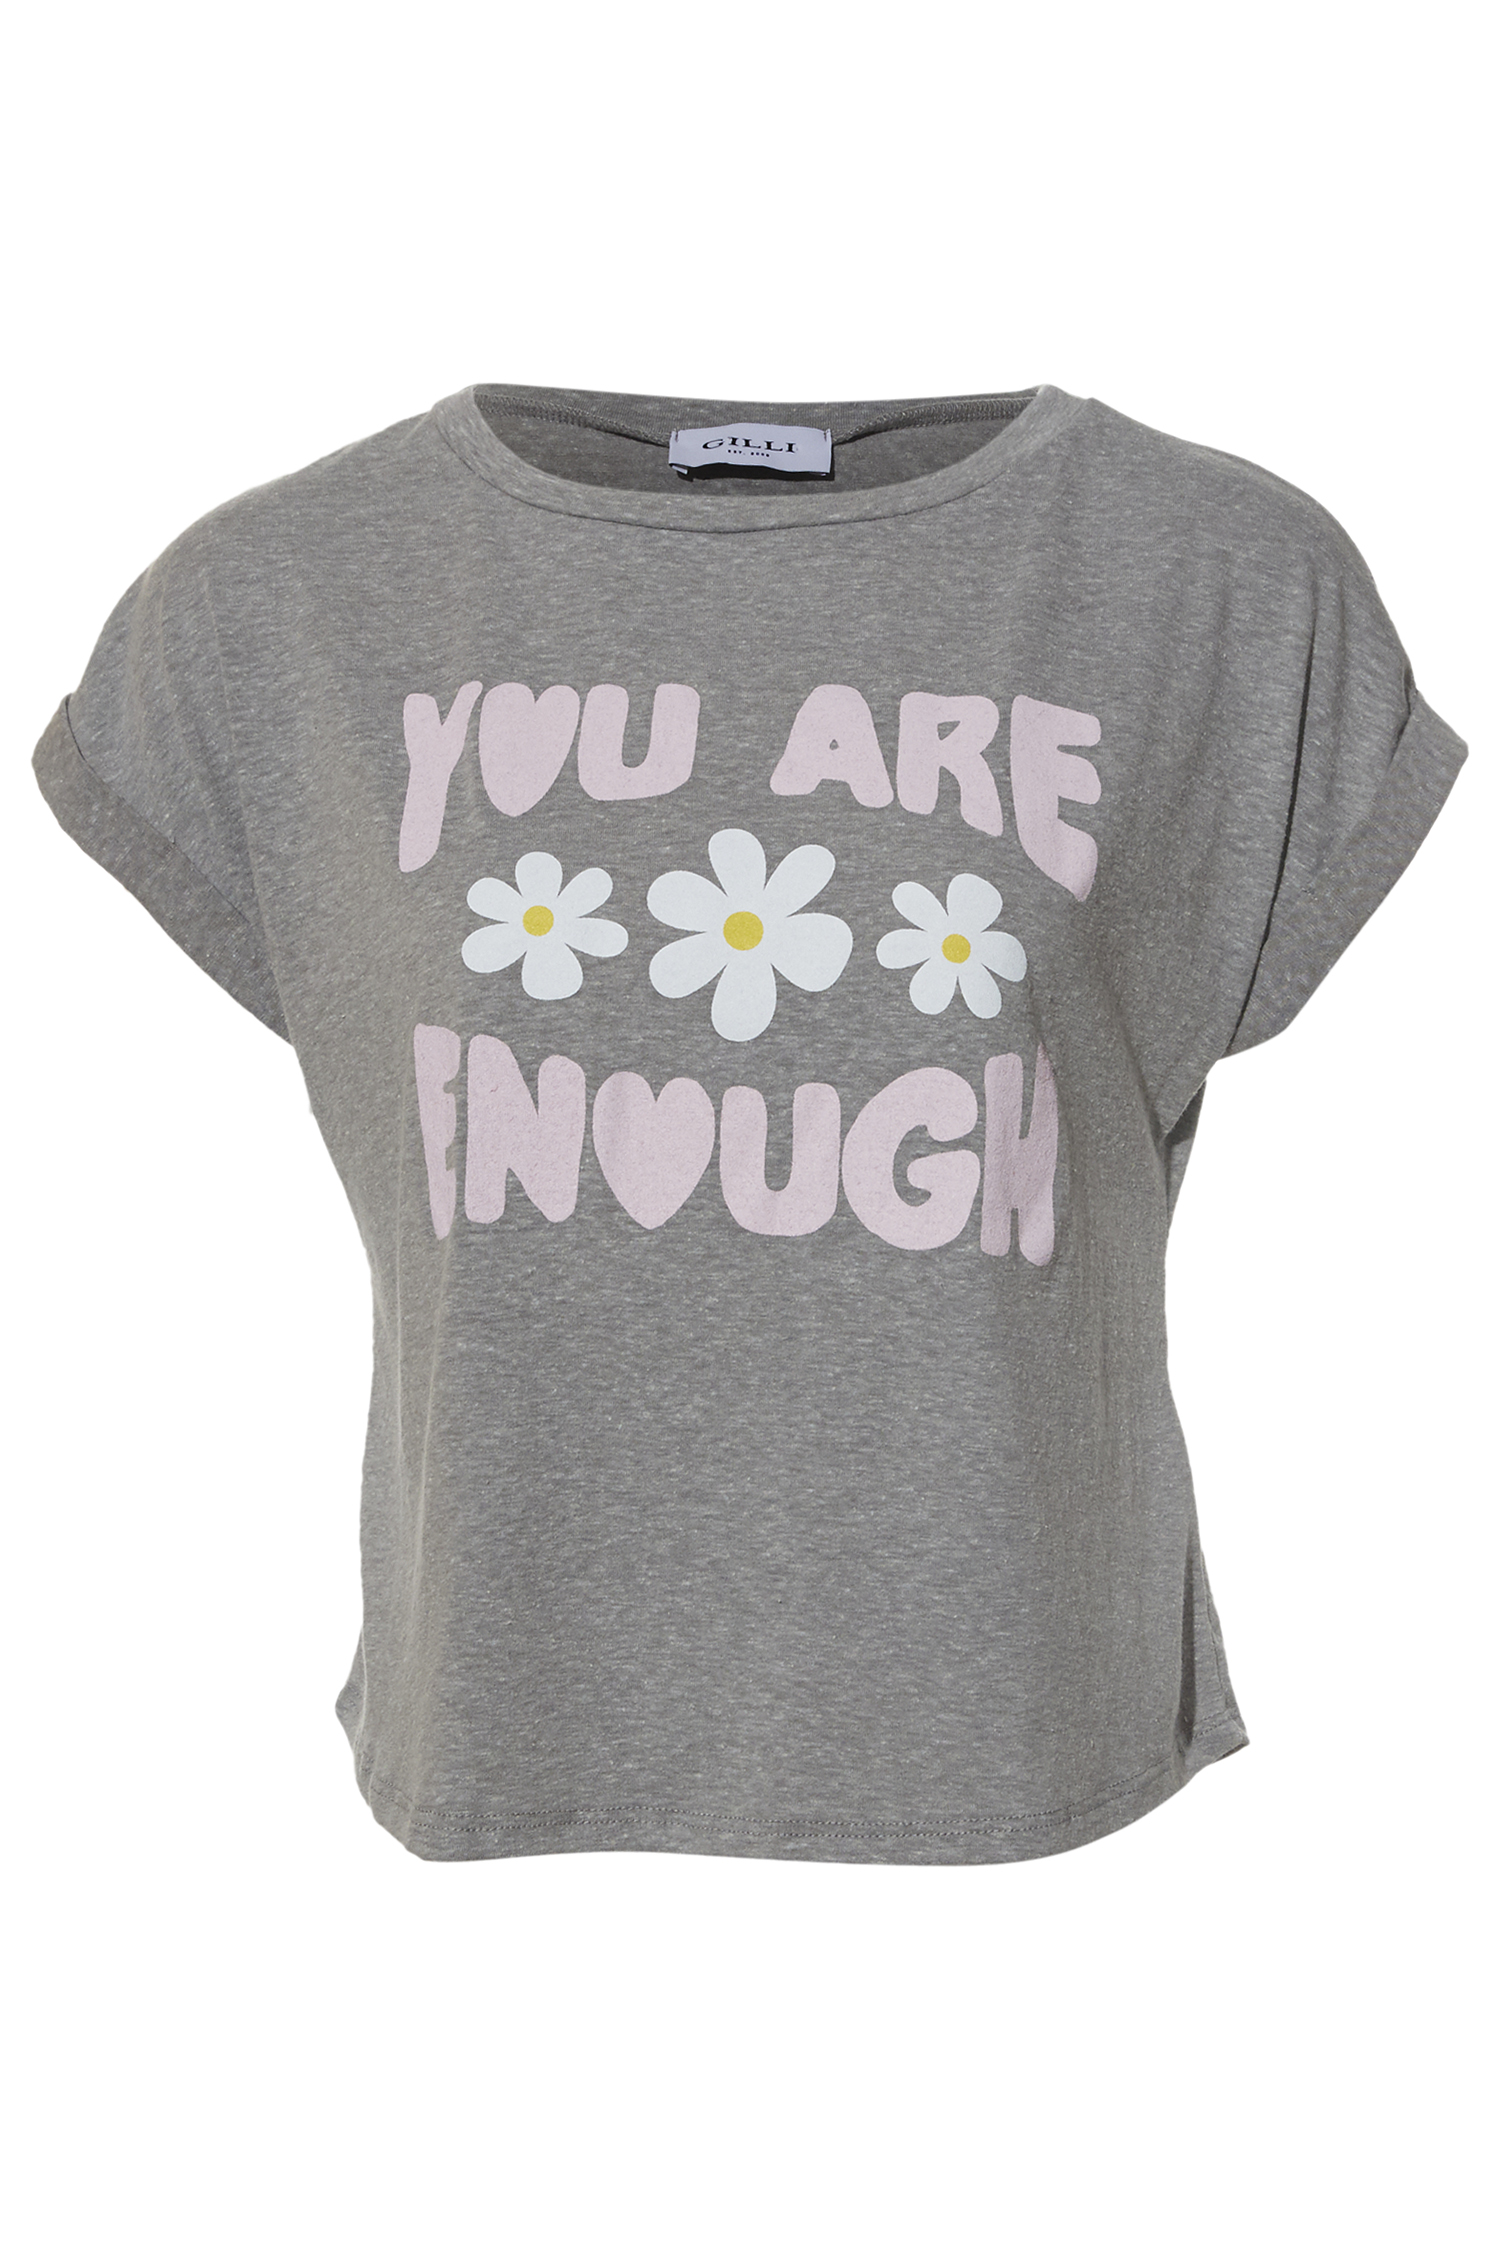 You Are Enough T Shirt